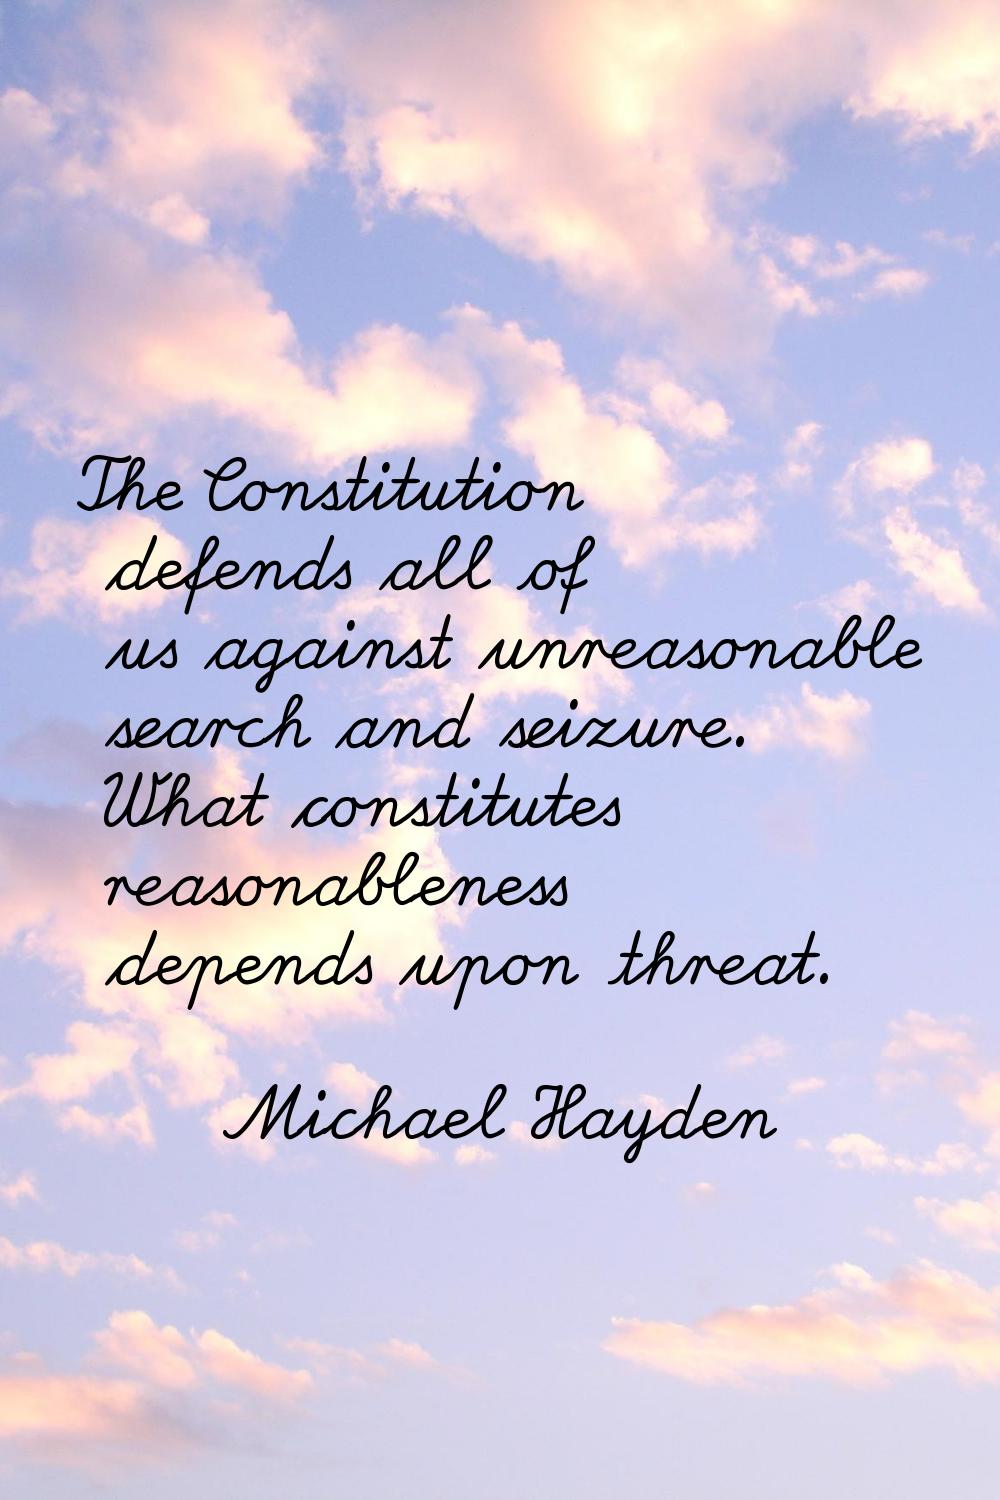 The Constitution defends all of us against unreasonable search and seizure. What constitutes reason